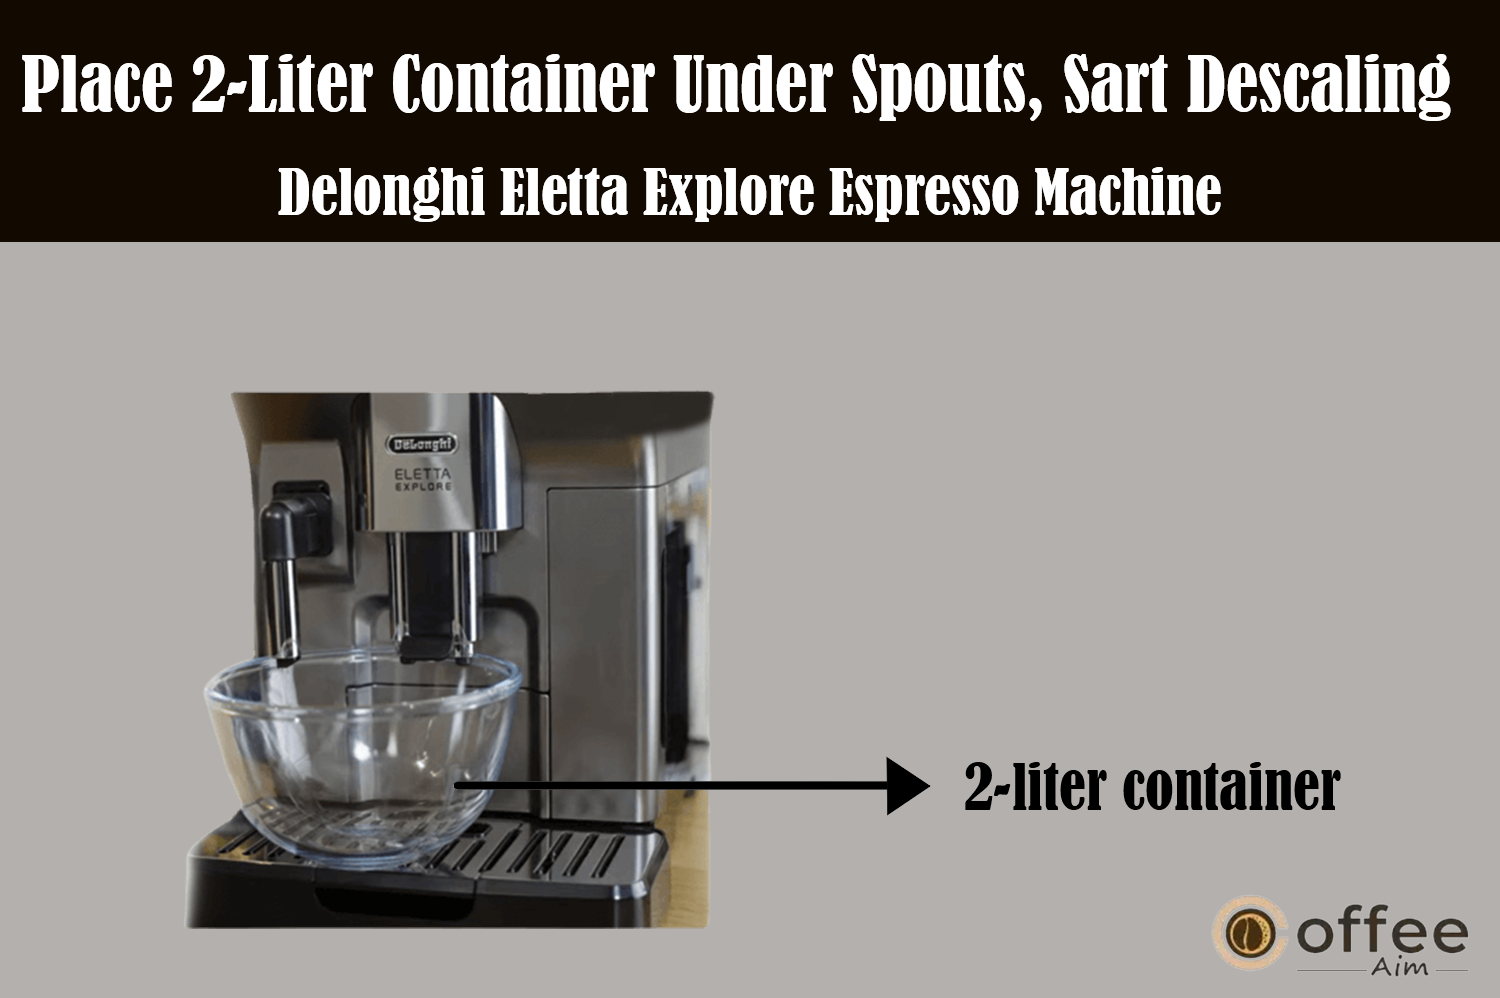 The image instructs the placement of a 2-liter container under the spouts and initiating the descaling process for the "Delonghi Eletta Explore Espresso Machine," as detailed in the article "How to Use the Delonghi Eletta Explore Espresso Machine."